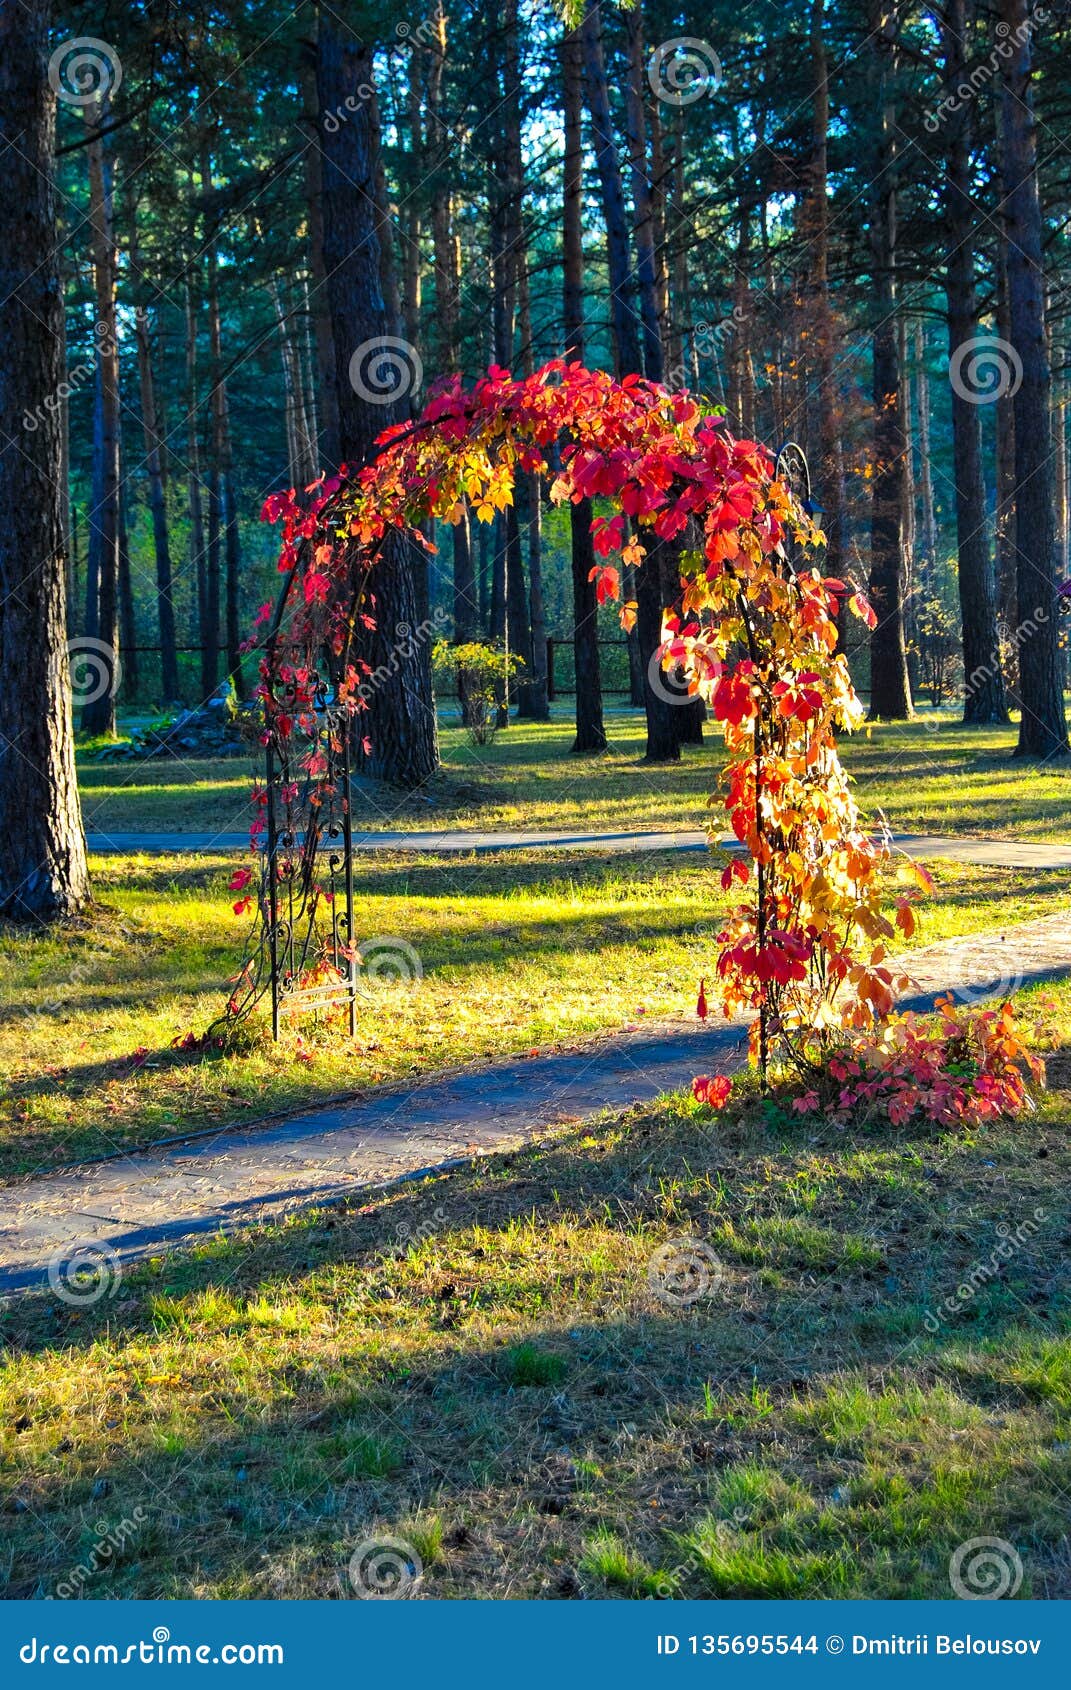 arch of leaves in the park